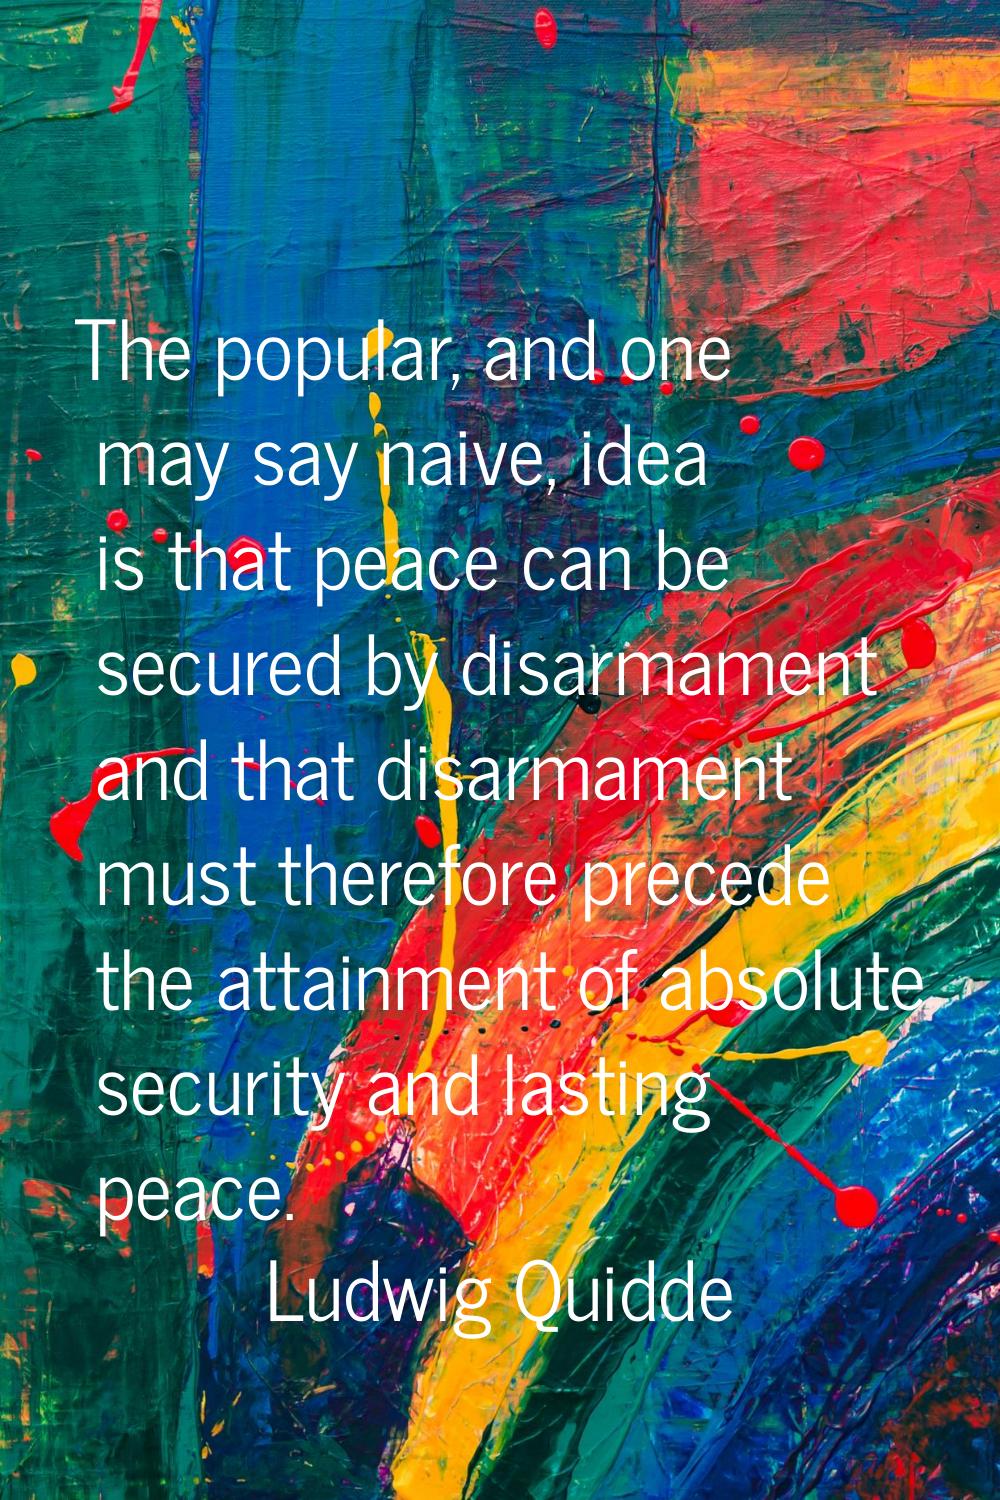 The popular, and one may say naive, idea is that peace can be secured by disarmament and that disar